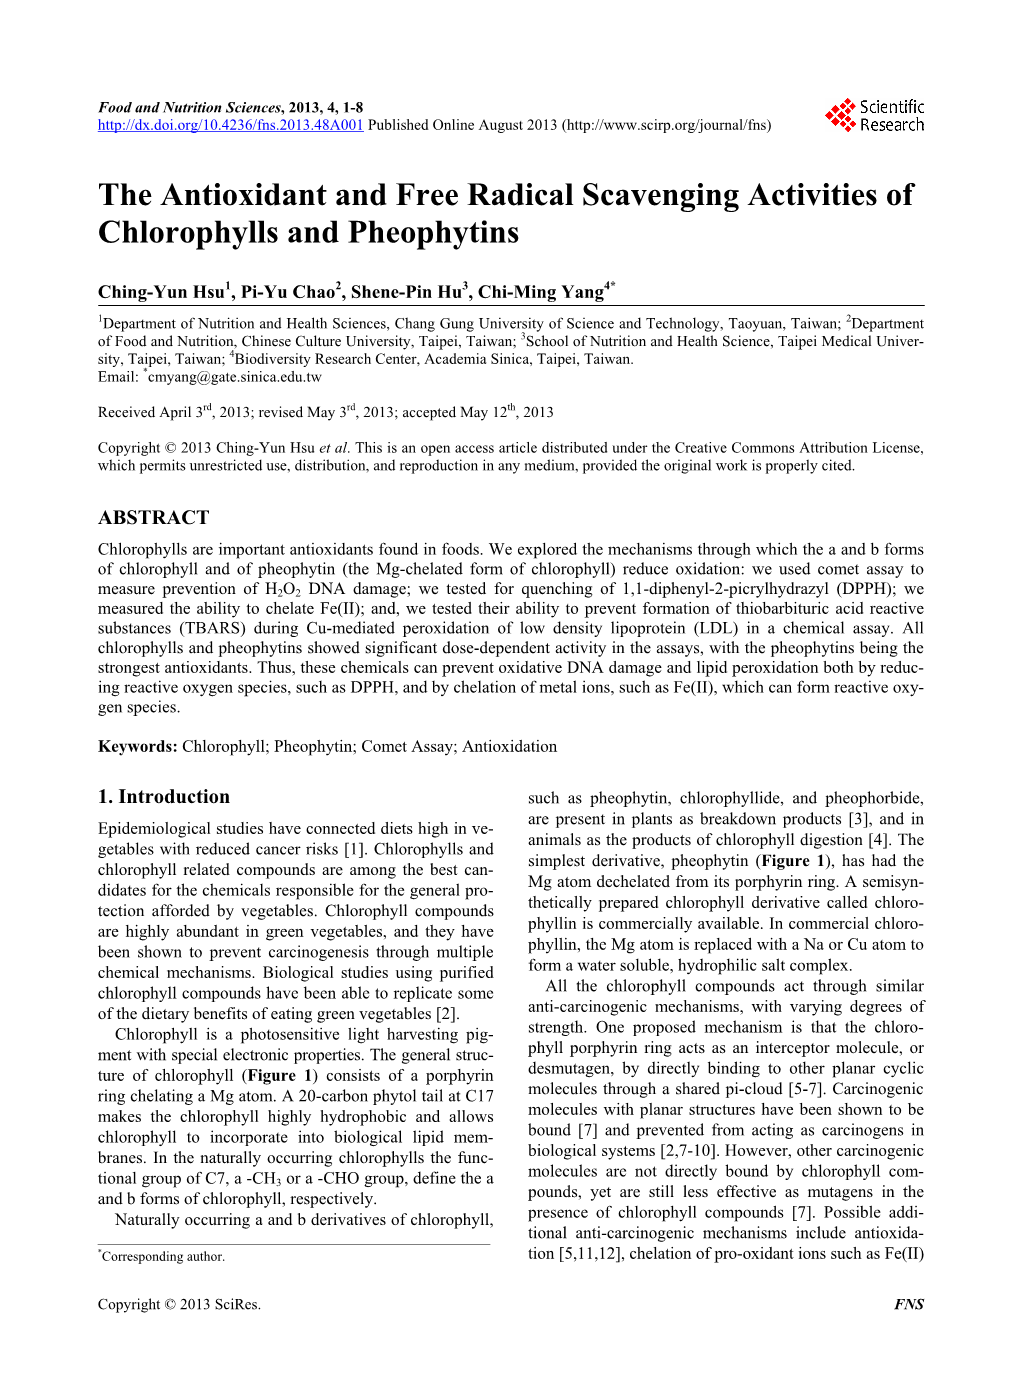 The Antioxidant and Free Radical Scavenging Activities of Chlorophylls and Pheophytins